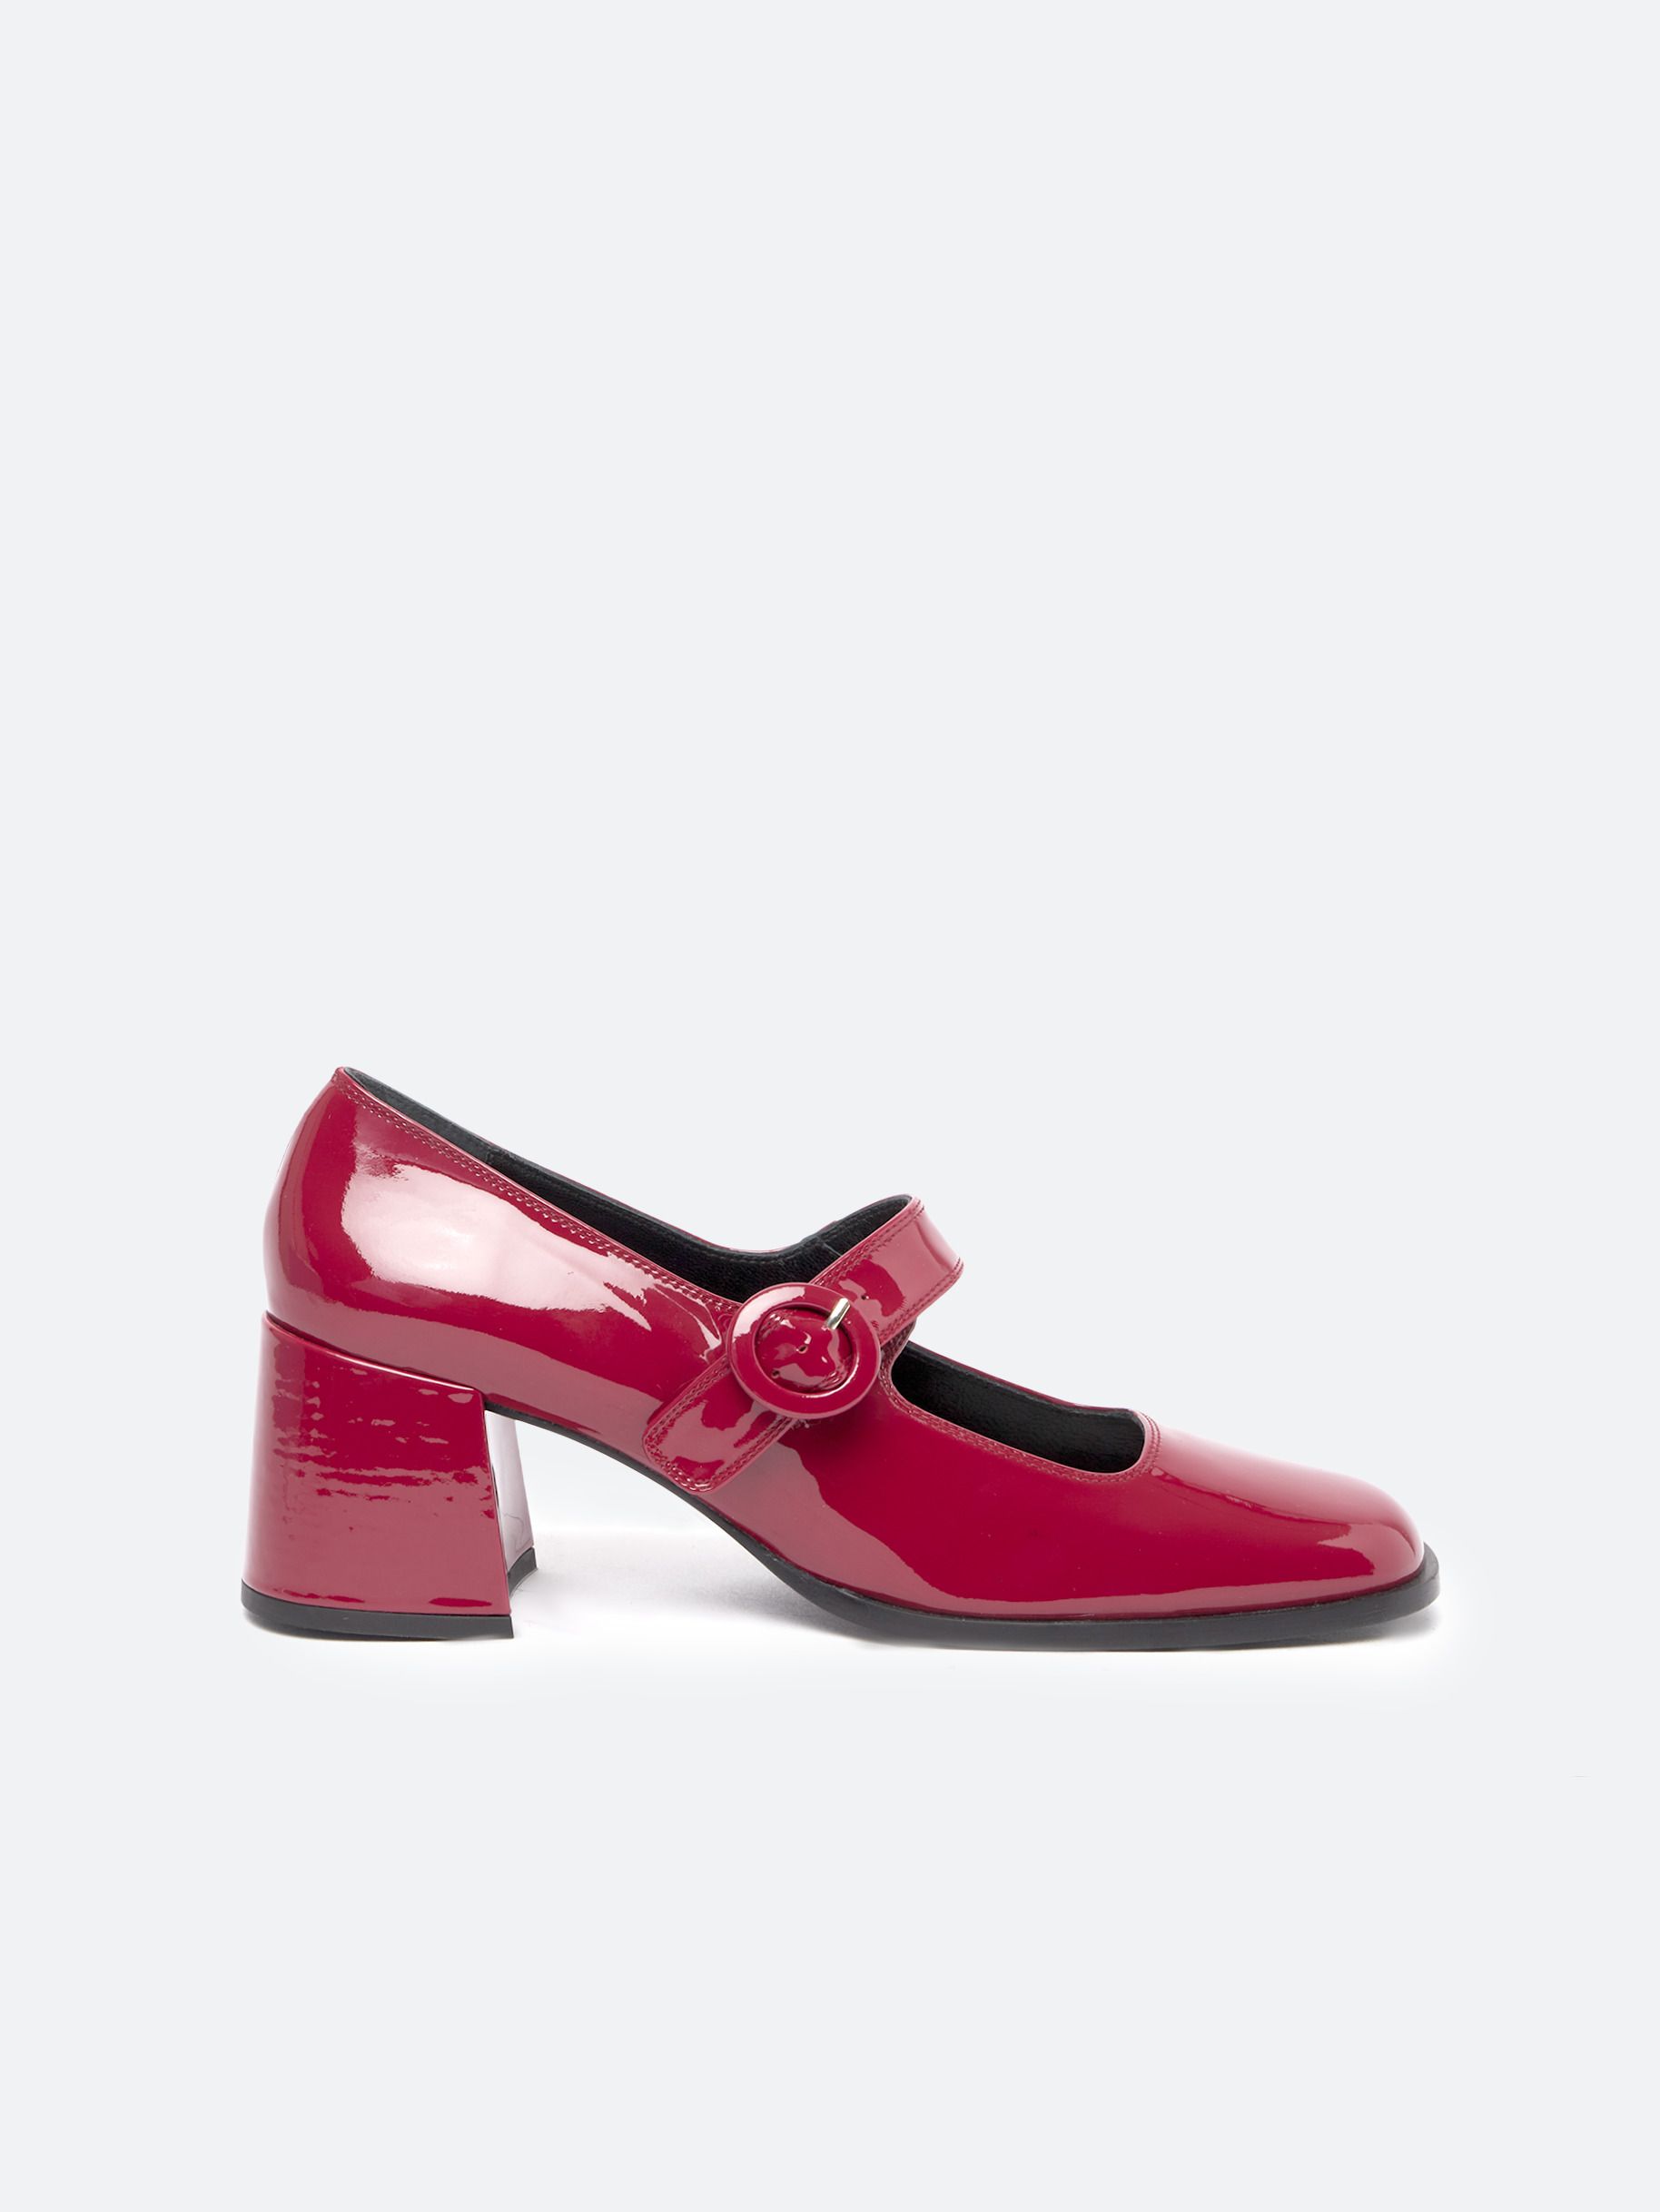 CAREN rasberry patent upcycled leather Janes | Carel Paris Shoes